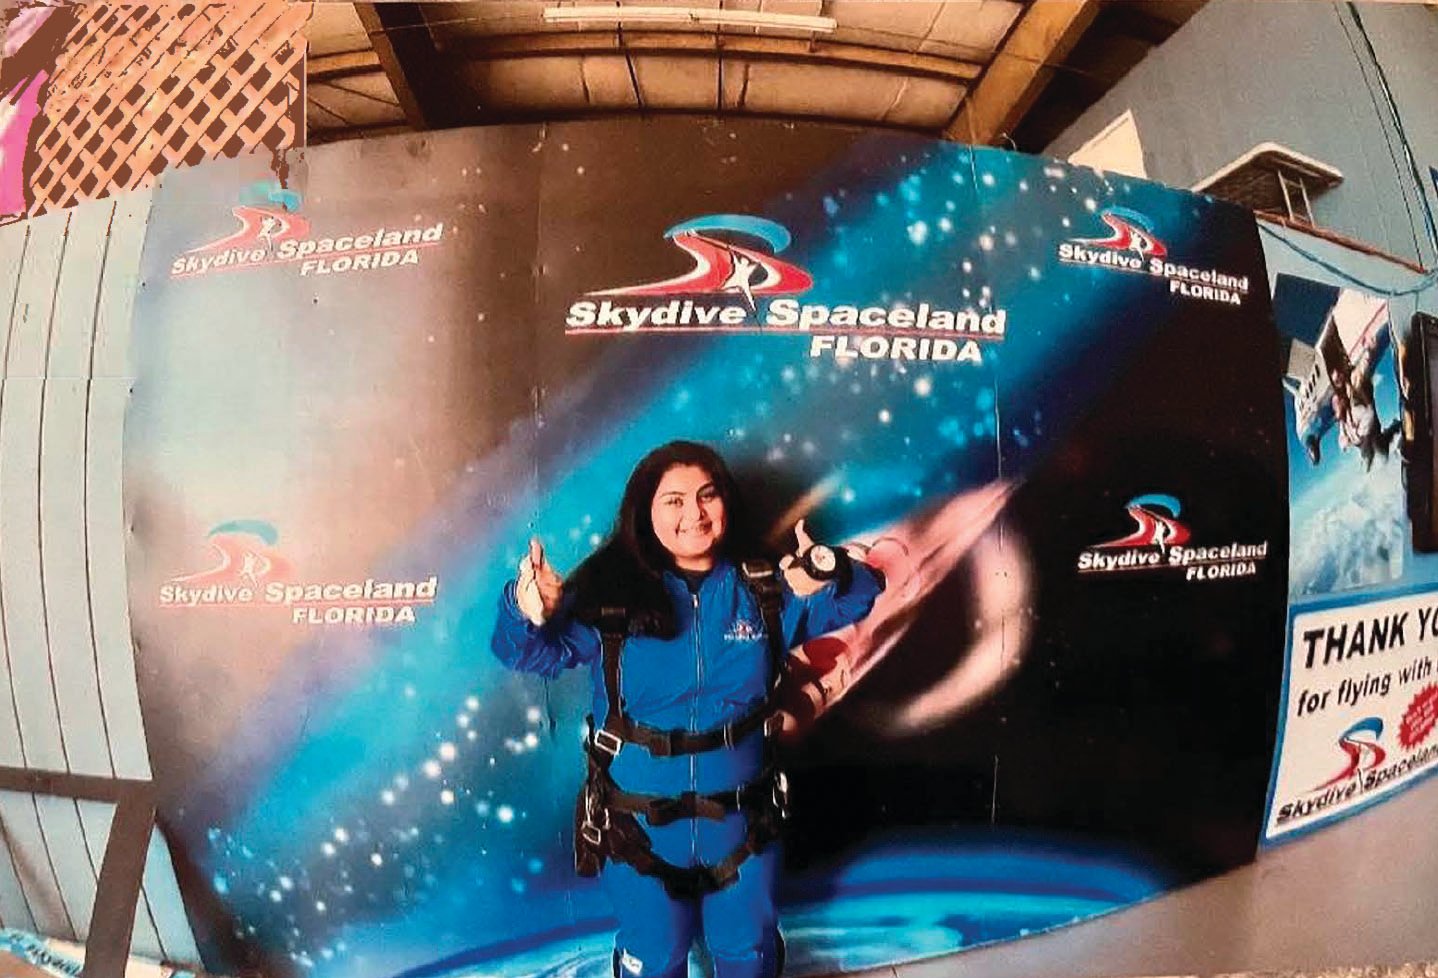 Crystal Flores decided to use her $500 scholarship to go skydiving.